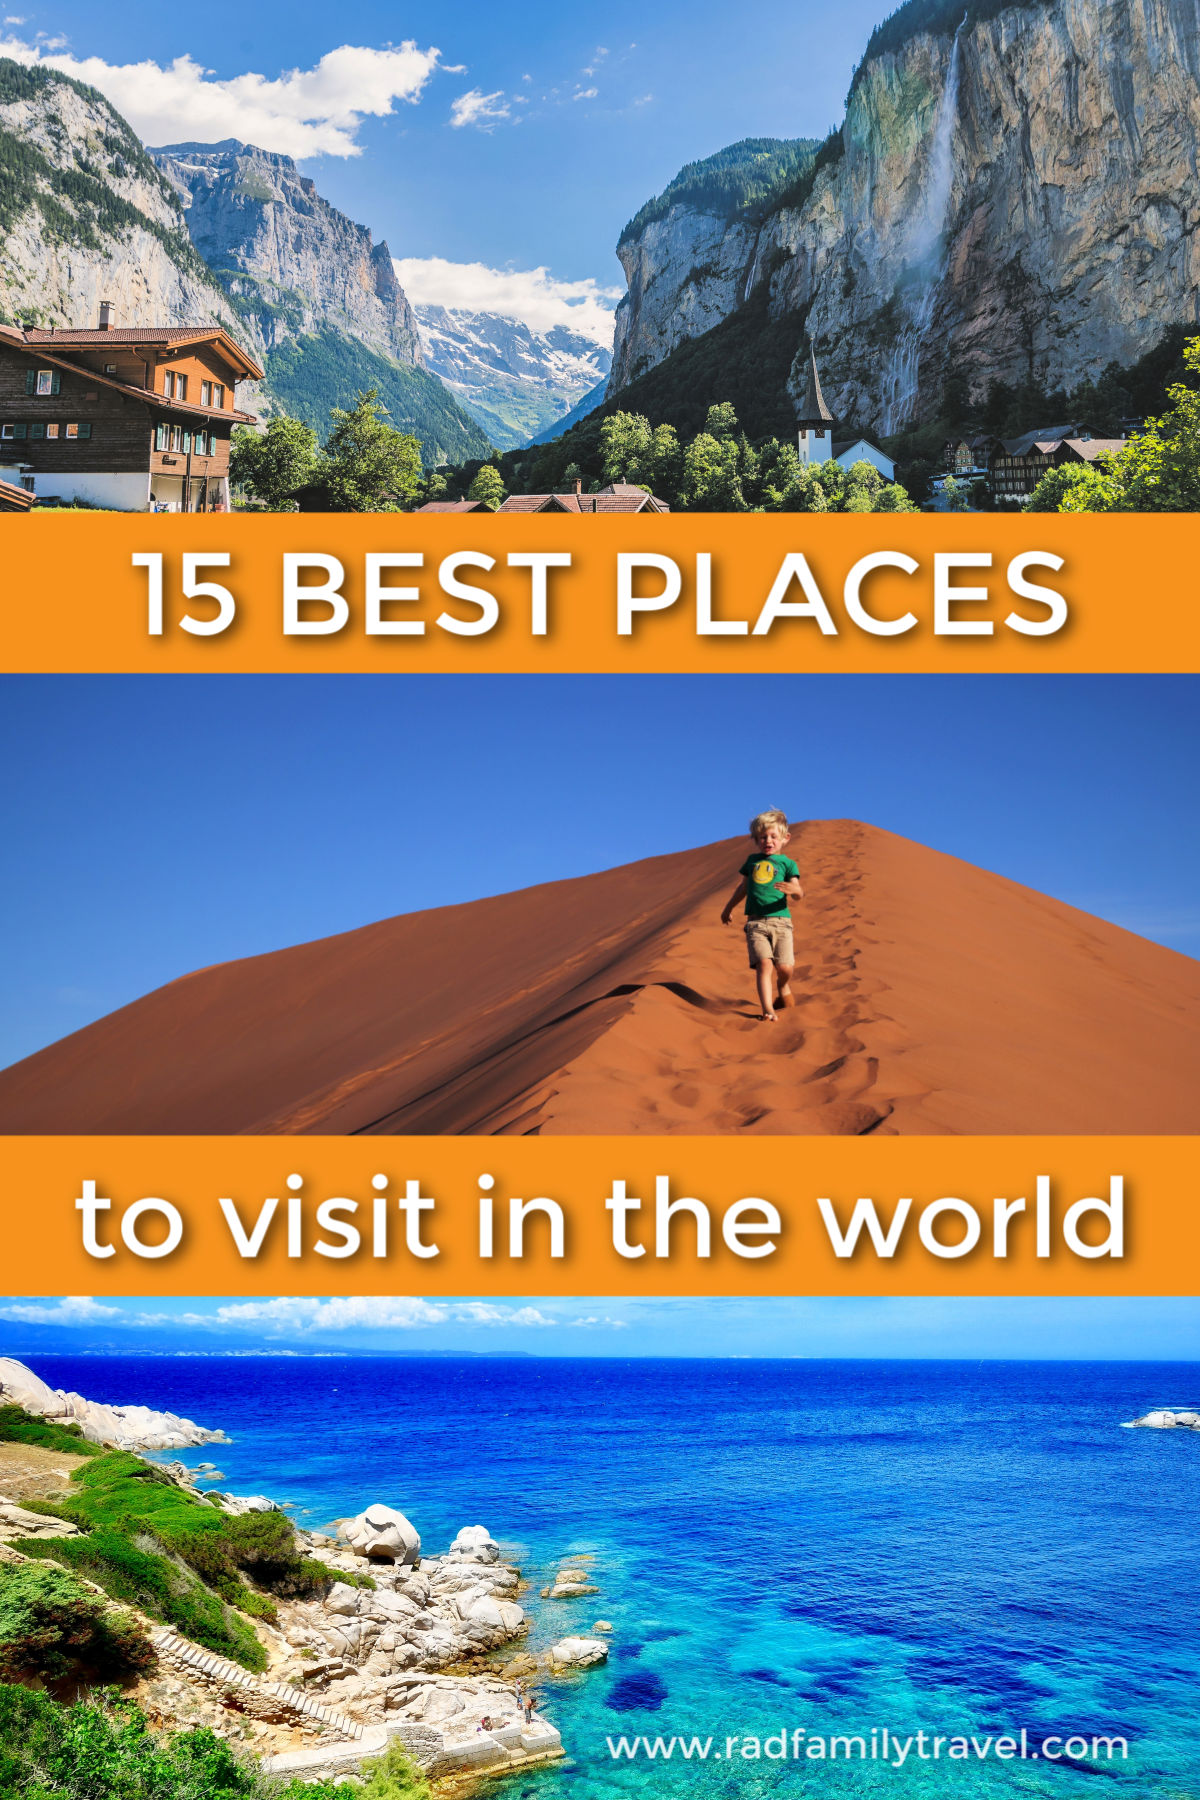 15 best places to visit in the world